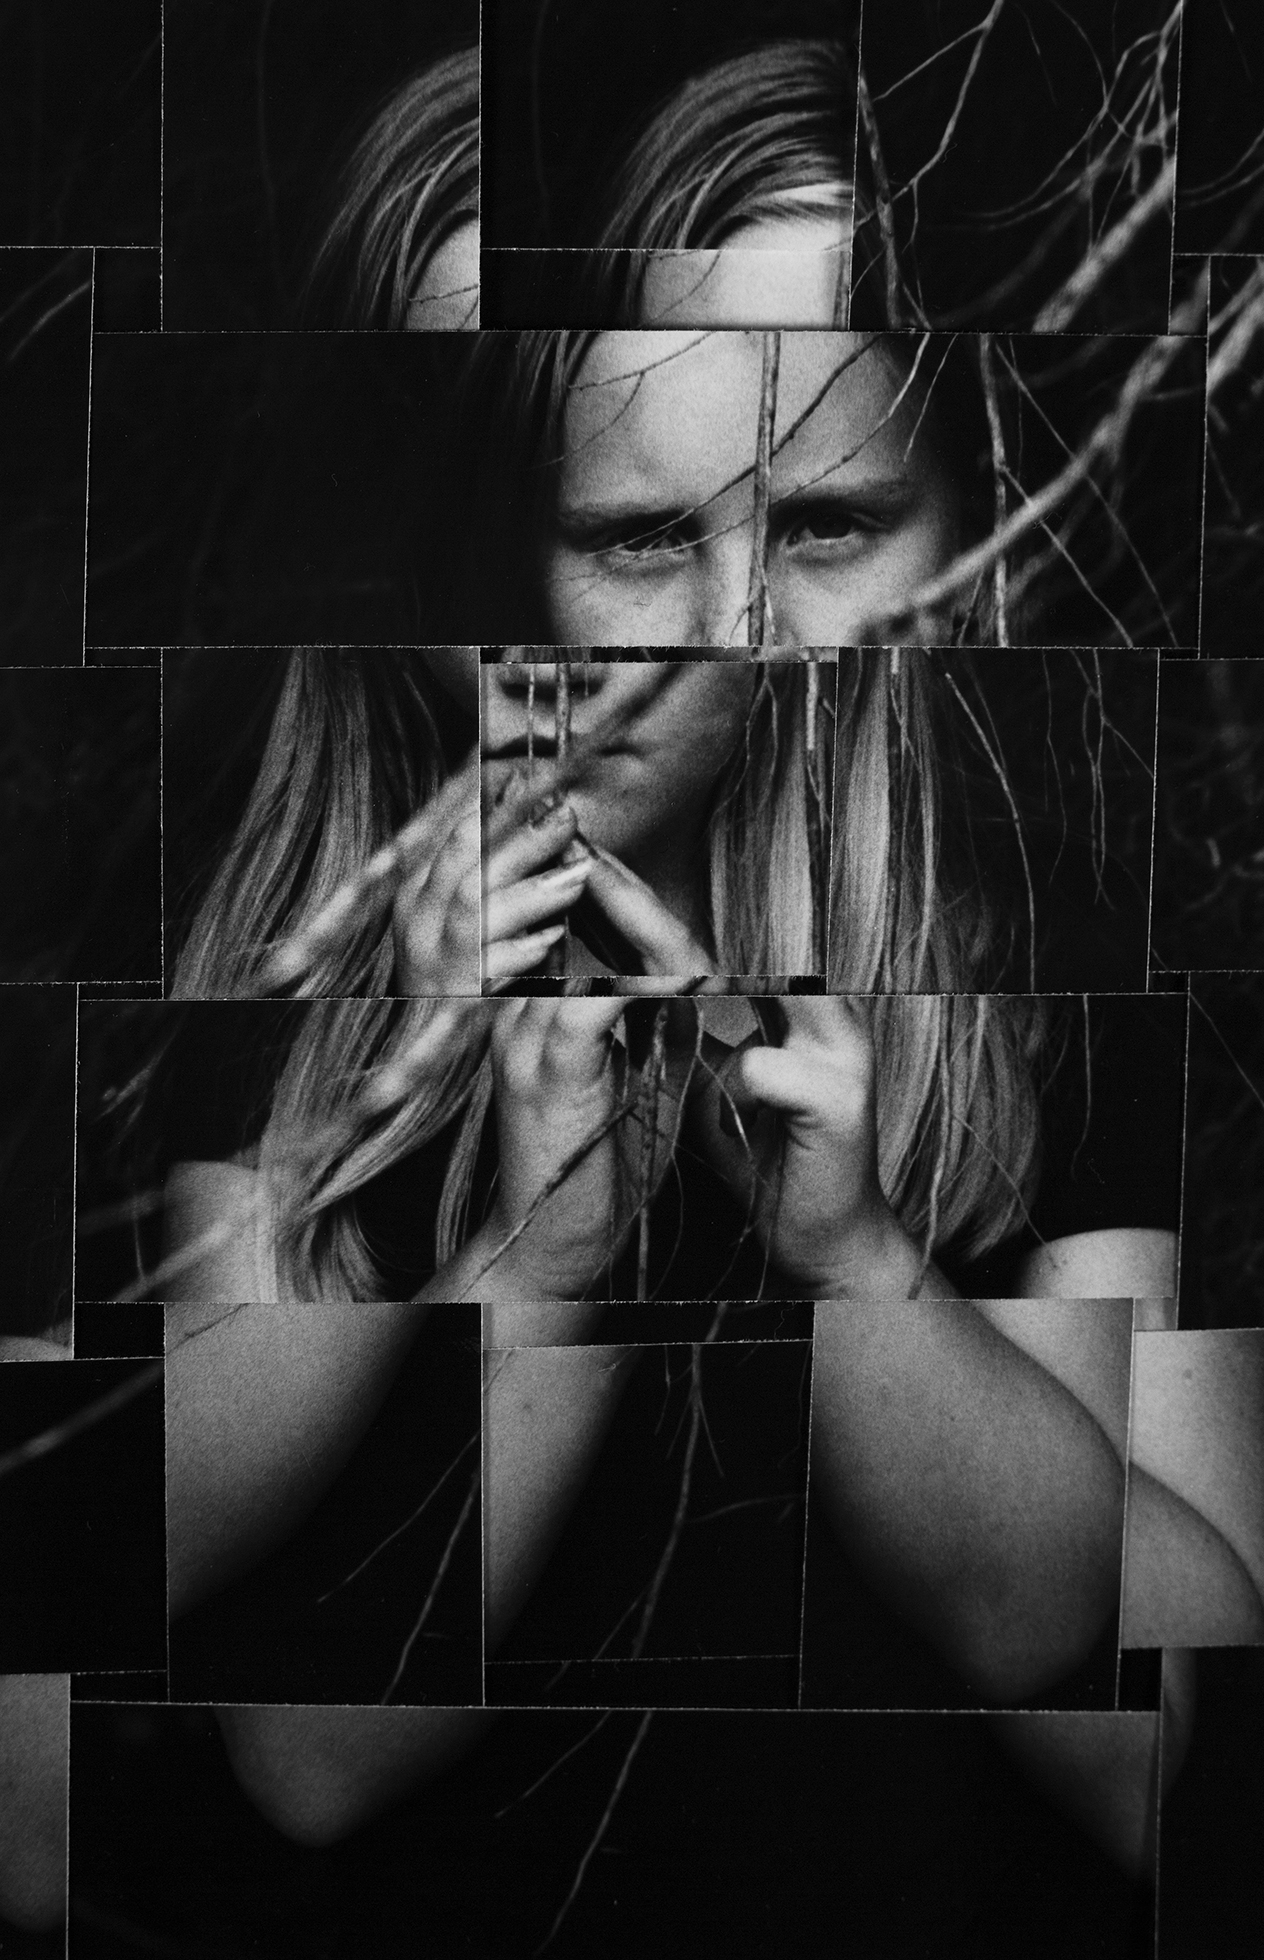 A fragmented image of a young girl holding a branch as branches cut in front of her.